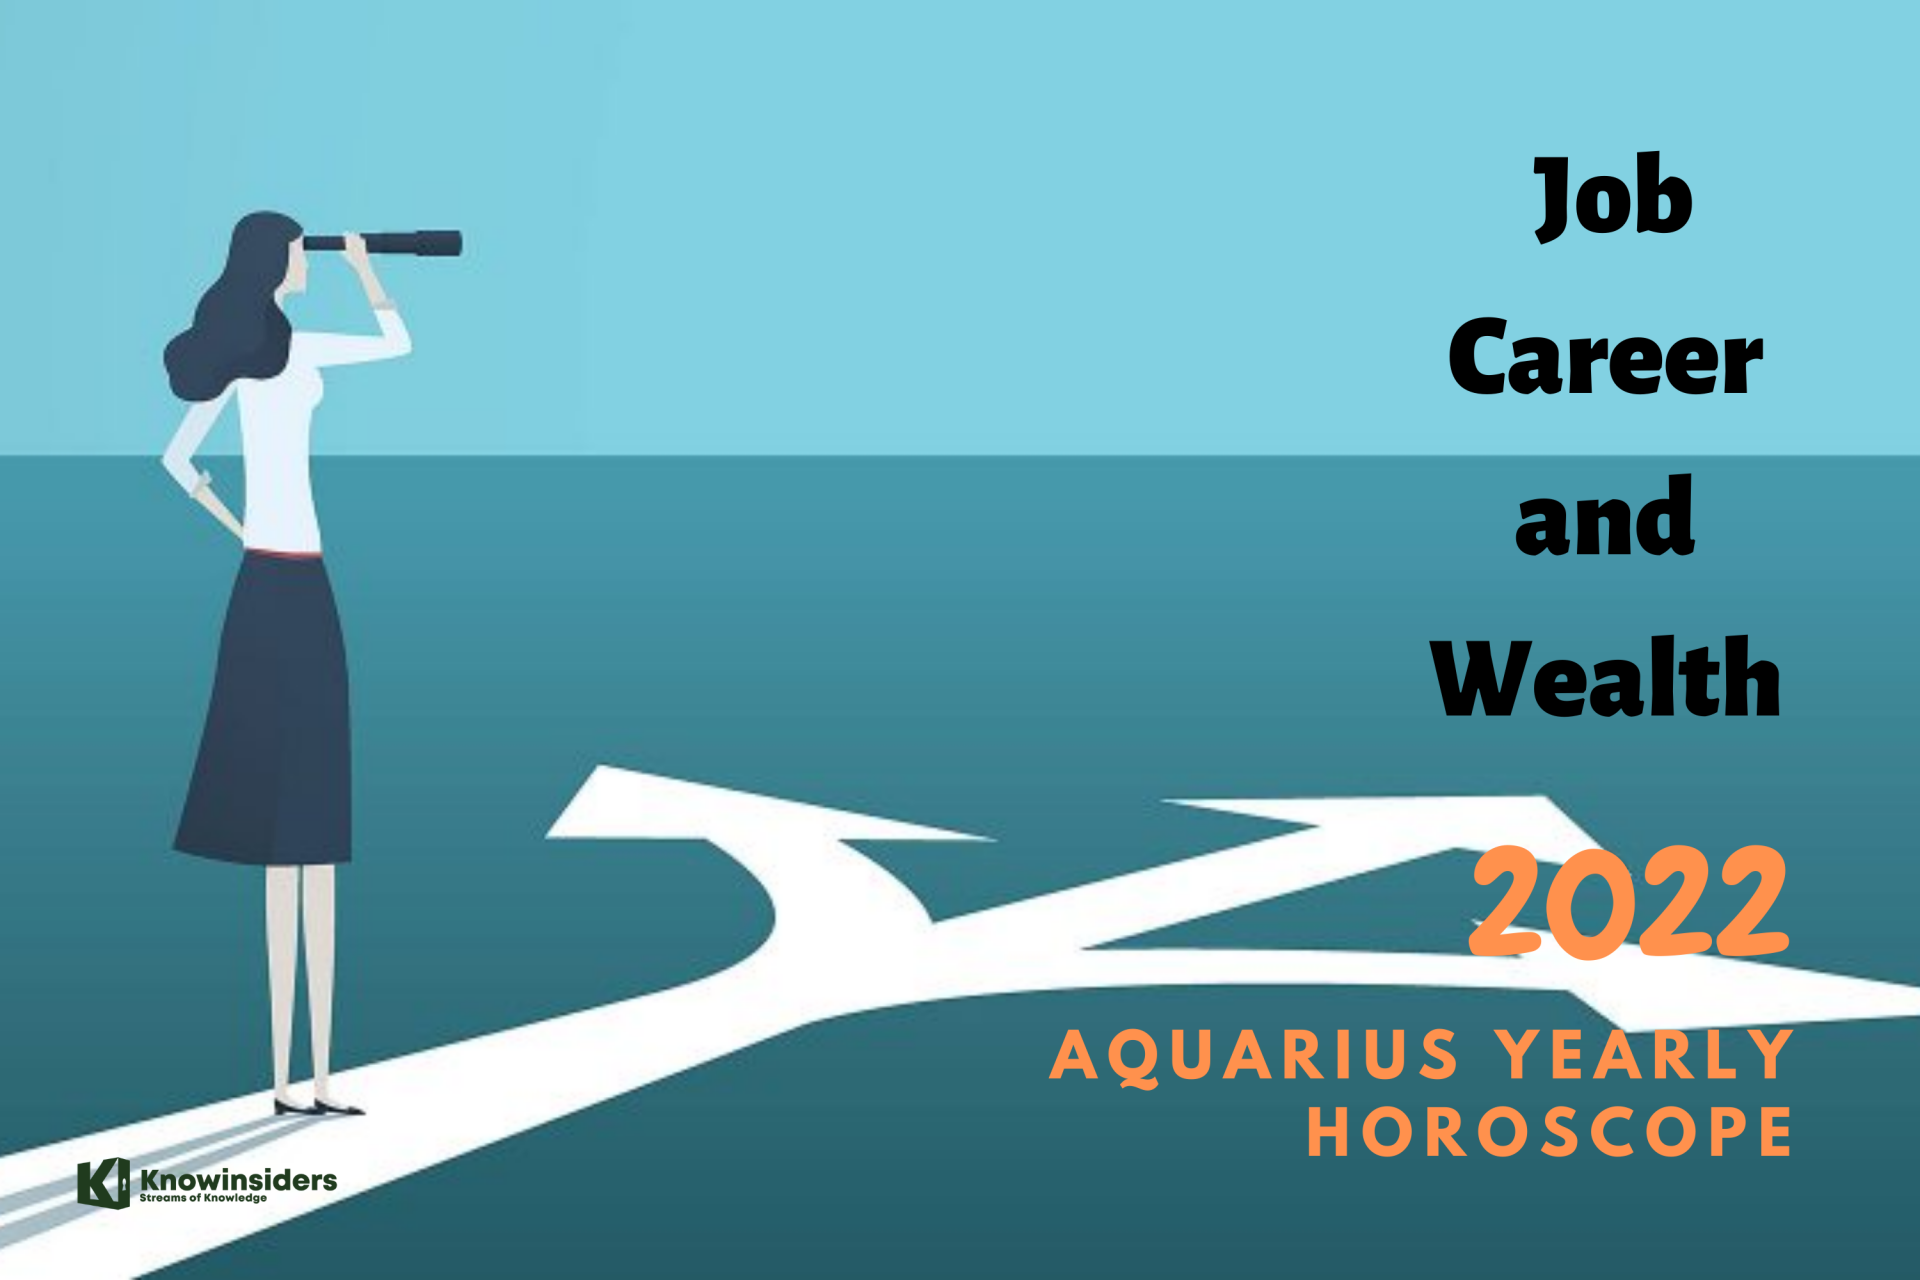 AQUARIUS Yearly Horoscope 2022: Predictions for Job, Career and Wealth